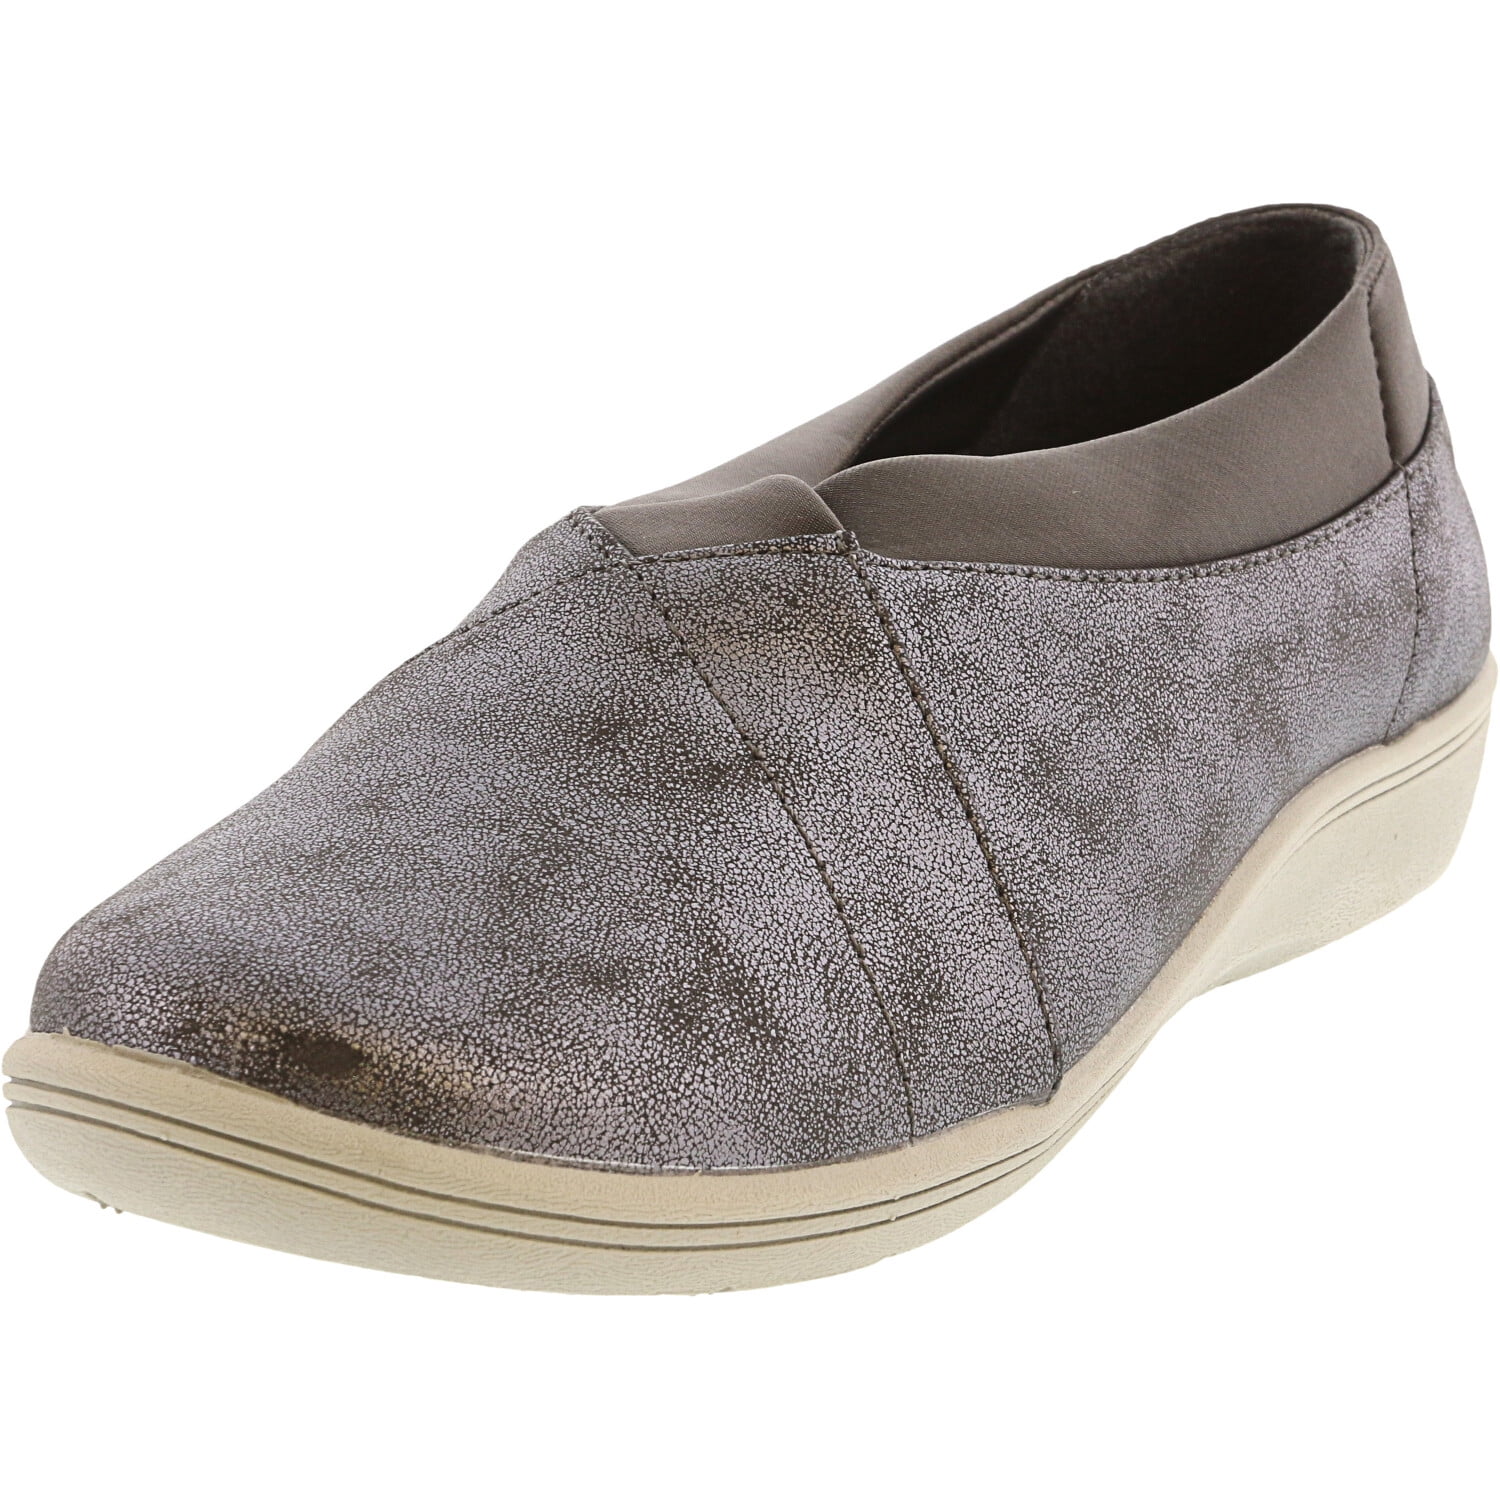 pewter slip on shoes